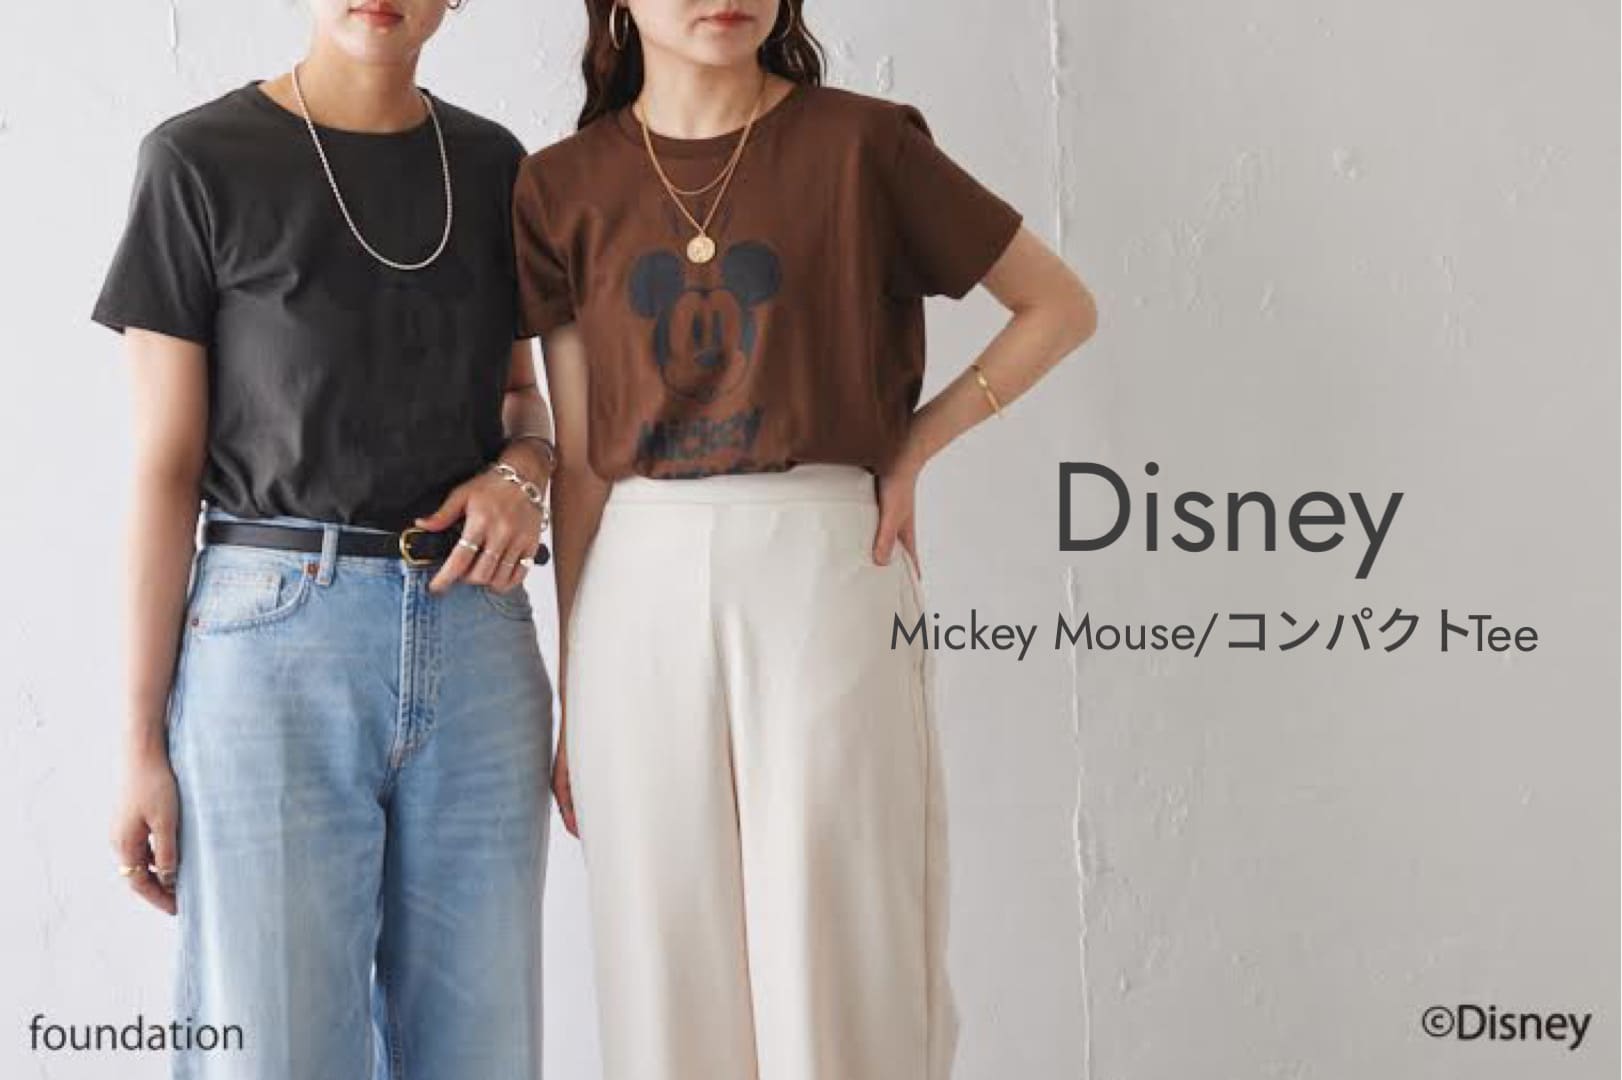 Pal collection 7.20(木) 12:00~ 予約販売スタート！Mickey Mouse / コンパクトTee